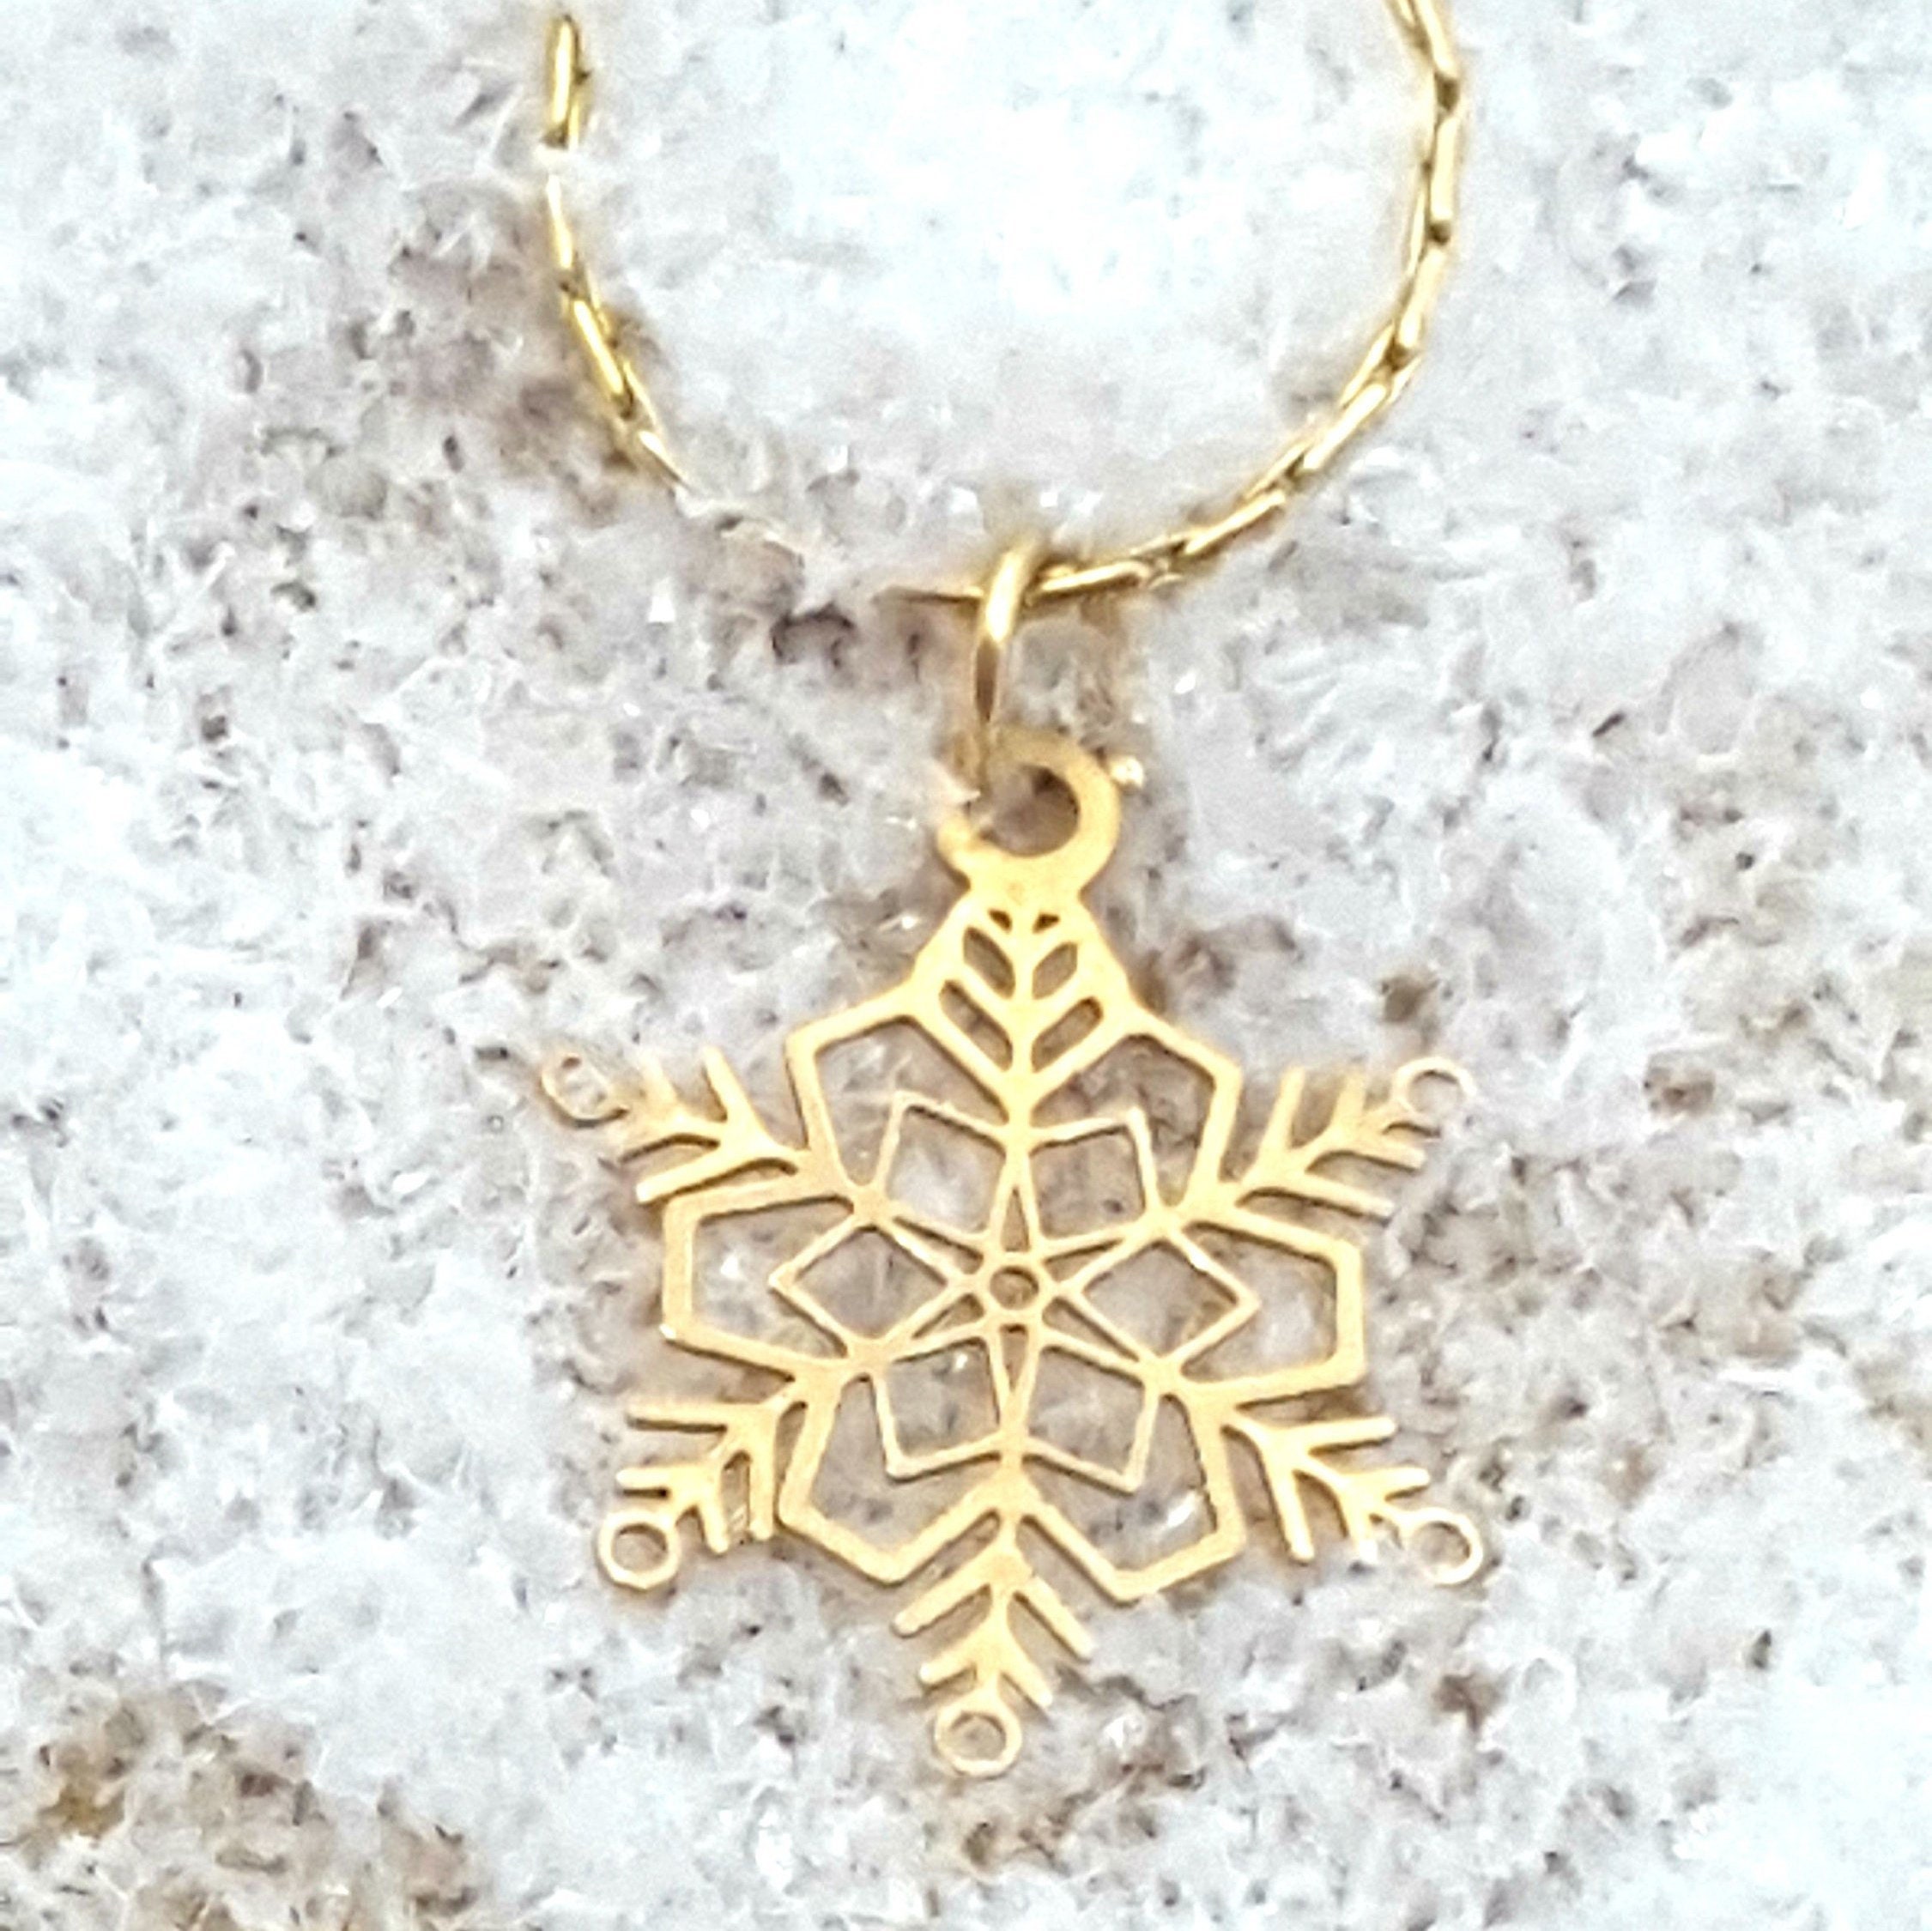 Gold filled snowflake necklace / gold necklace / snowflake | Etsy